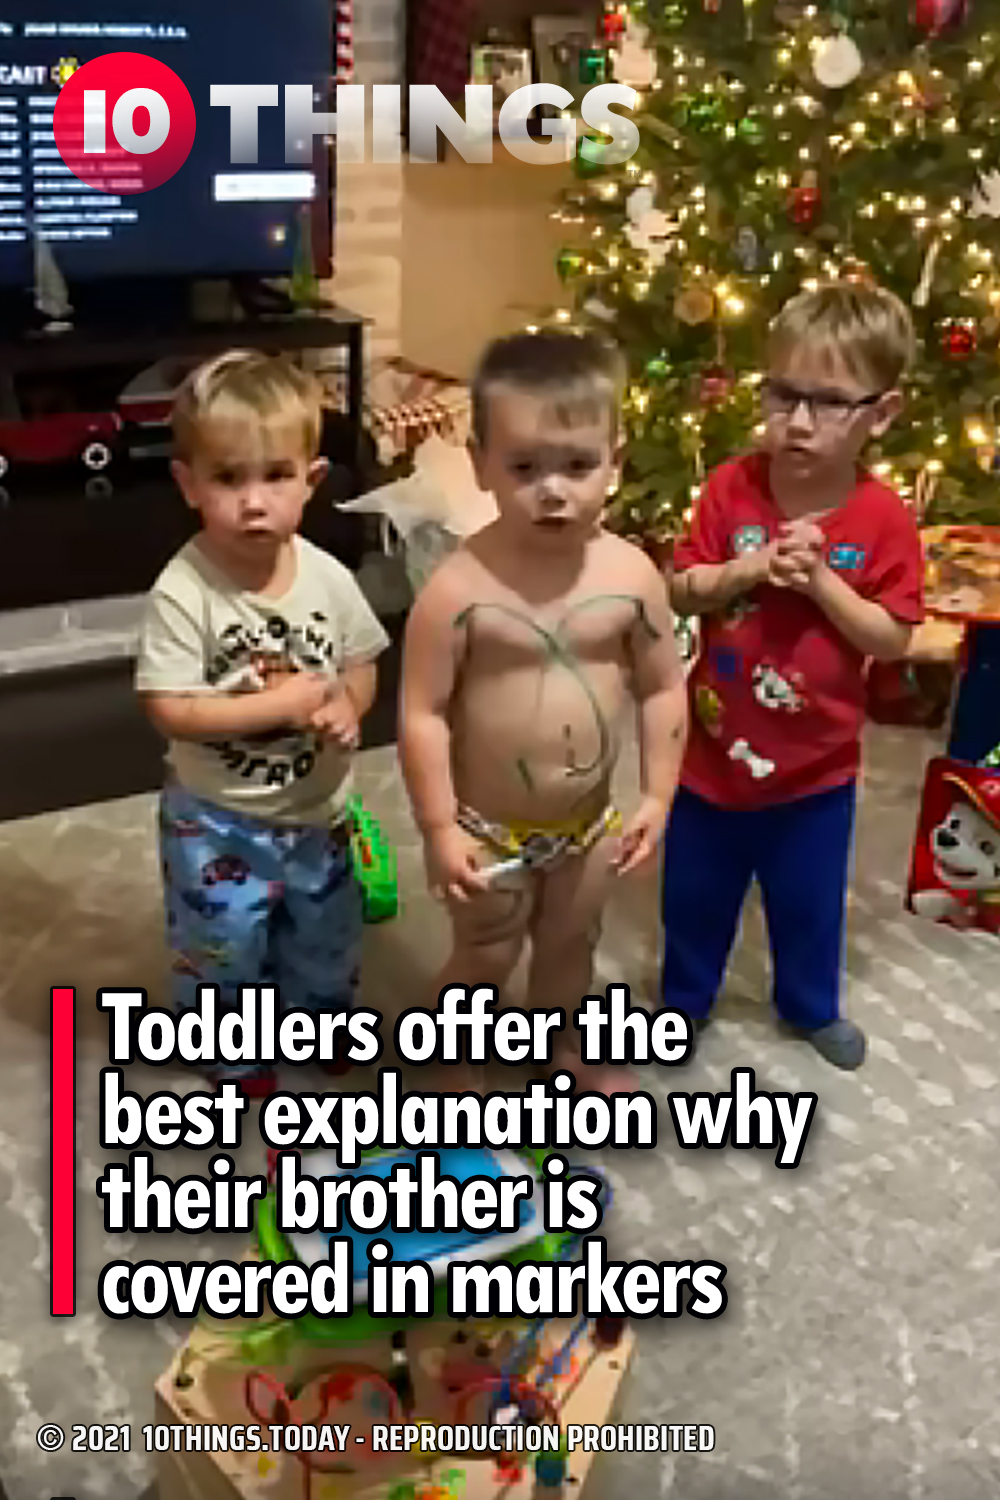 Toddlers offer the best explanation why their brother is covered in markers